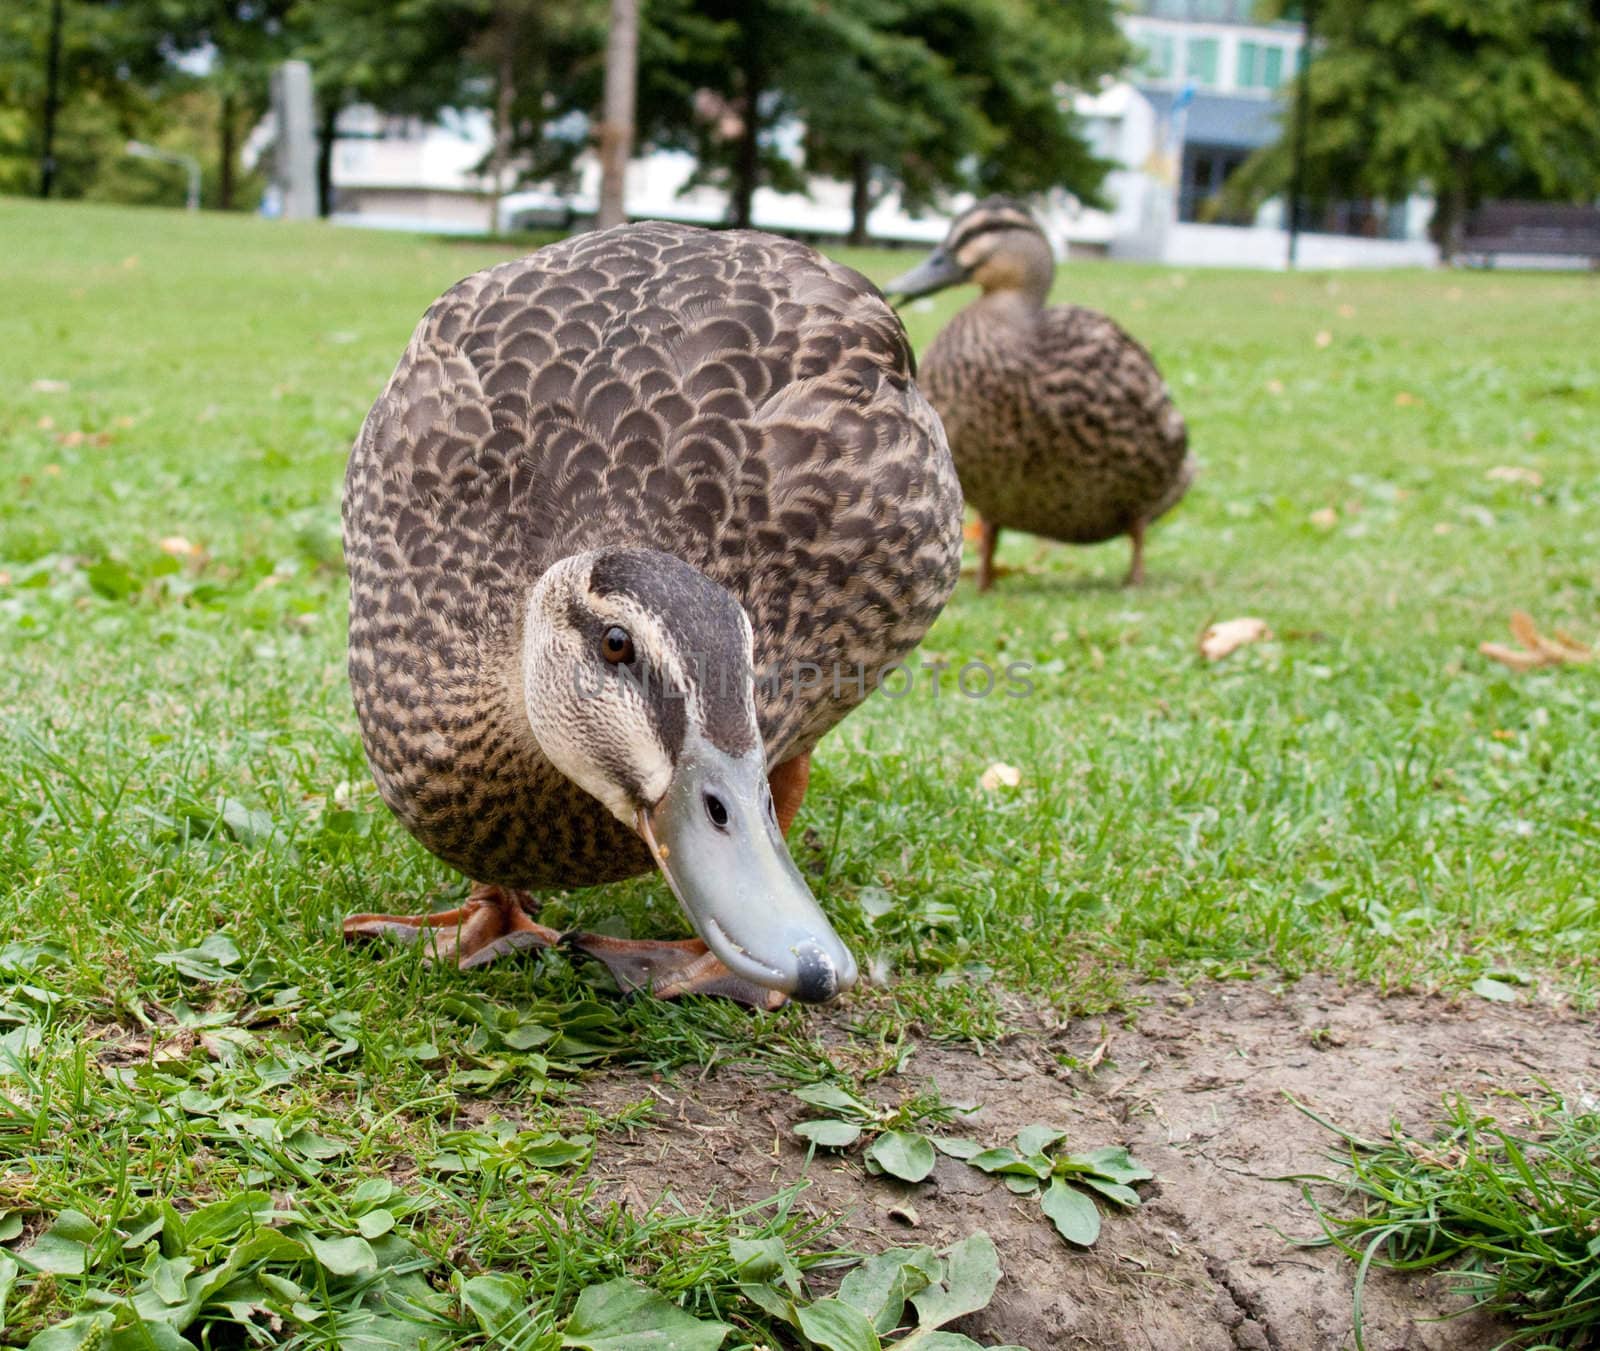 Close up of a duck approaching for some food